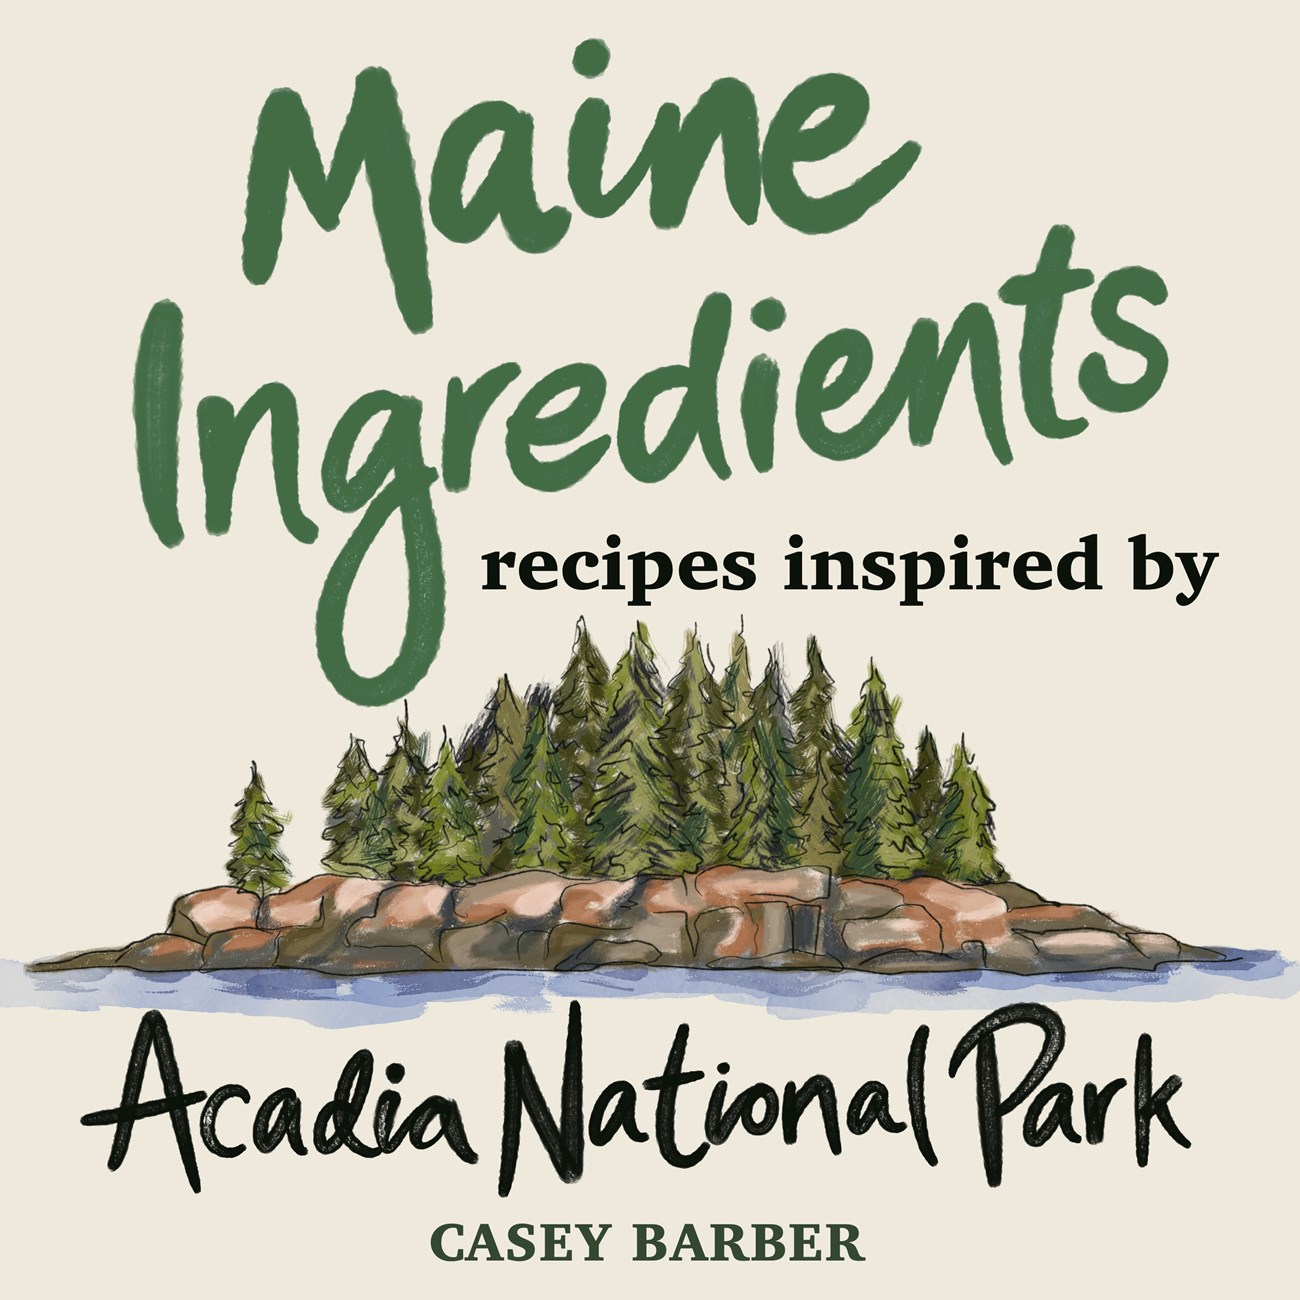 Image of a book cover with an illustration of a small rocky coastal island covered with pine trees. Text reads "Maine Ingredients, recipes inspired by Acadia National Park"